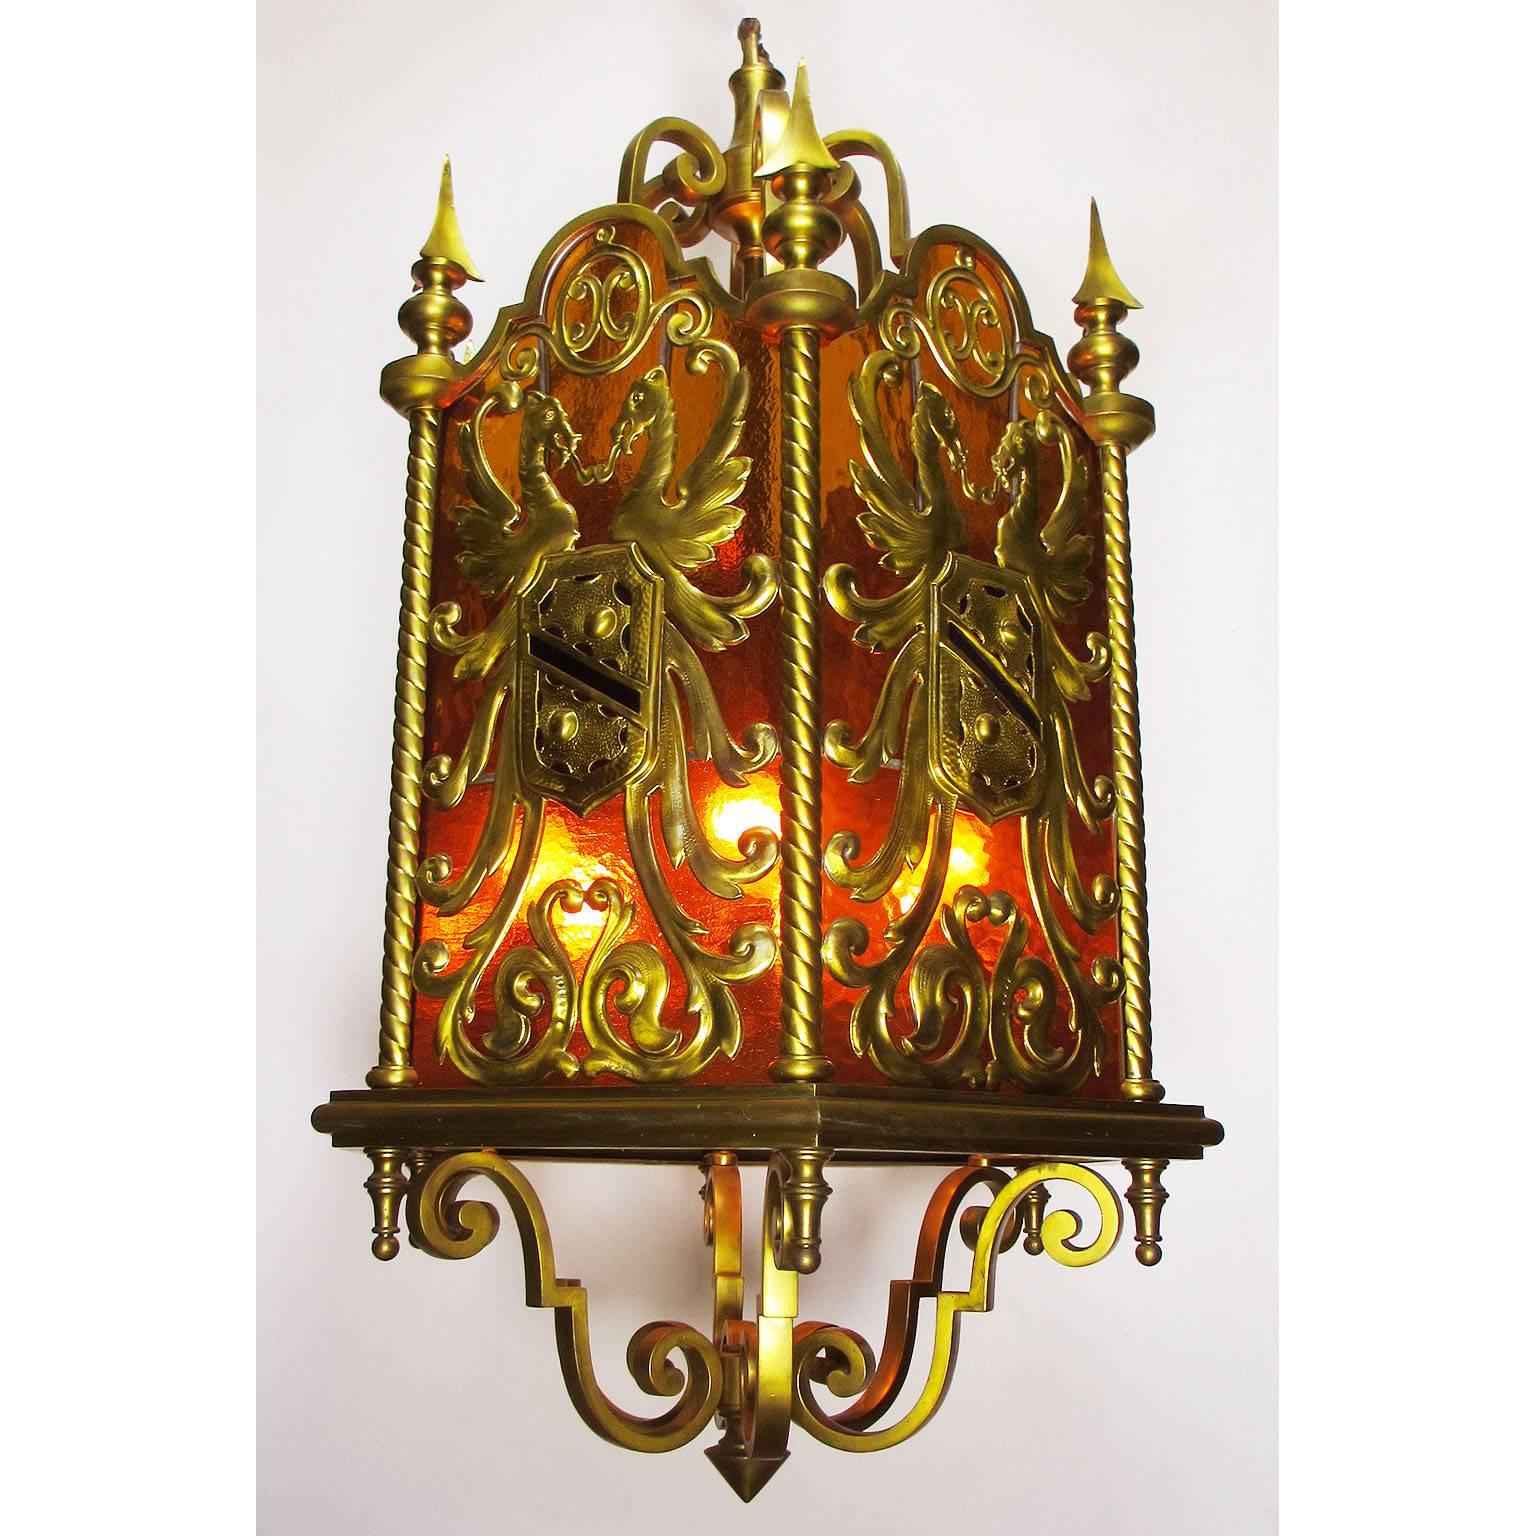 A fine and rare French 19th-20th century neoclassical style gilt bronze and color-glass figural hanging lantern, the hexagonal shaped body with an orange glass paneling background, each panel centered with a gilt bronze Royal Crest depicting